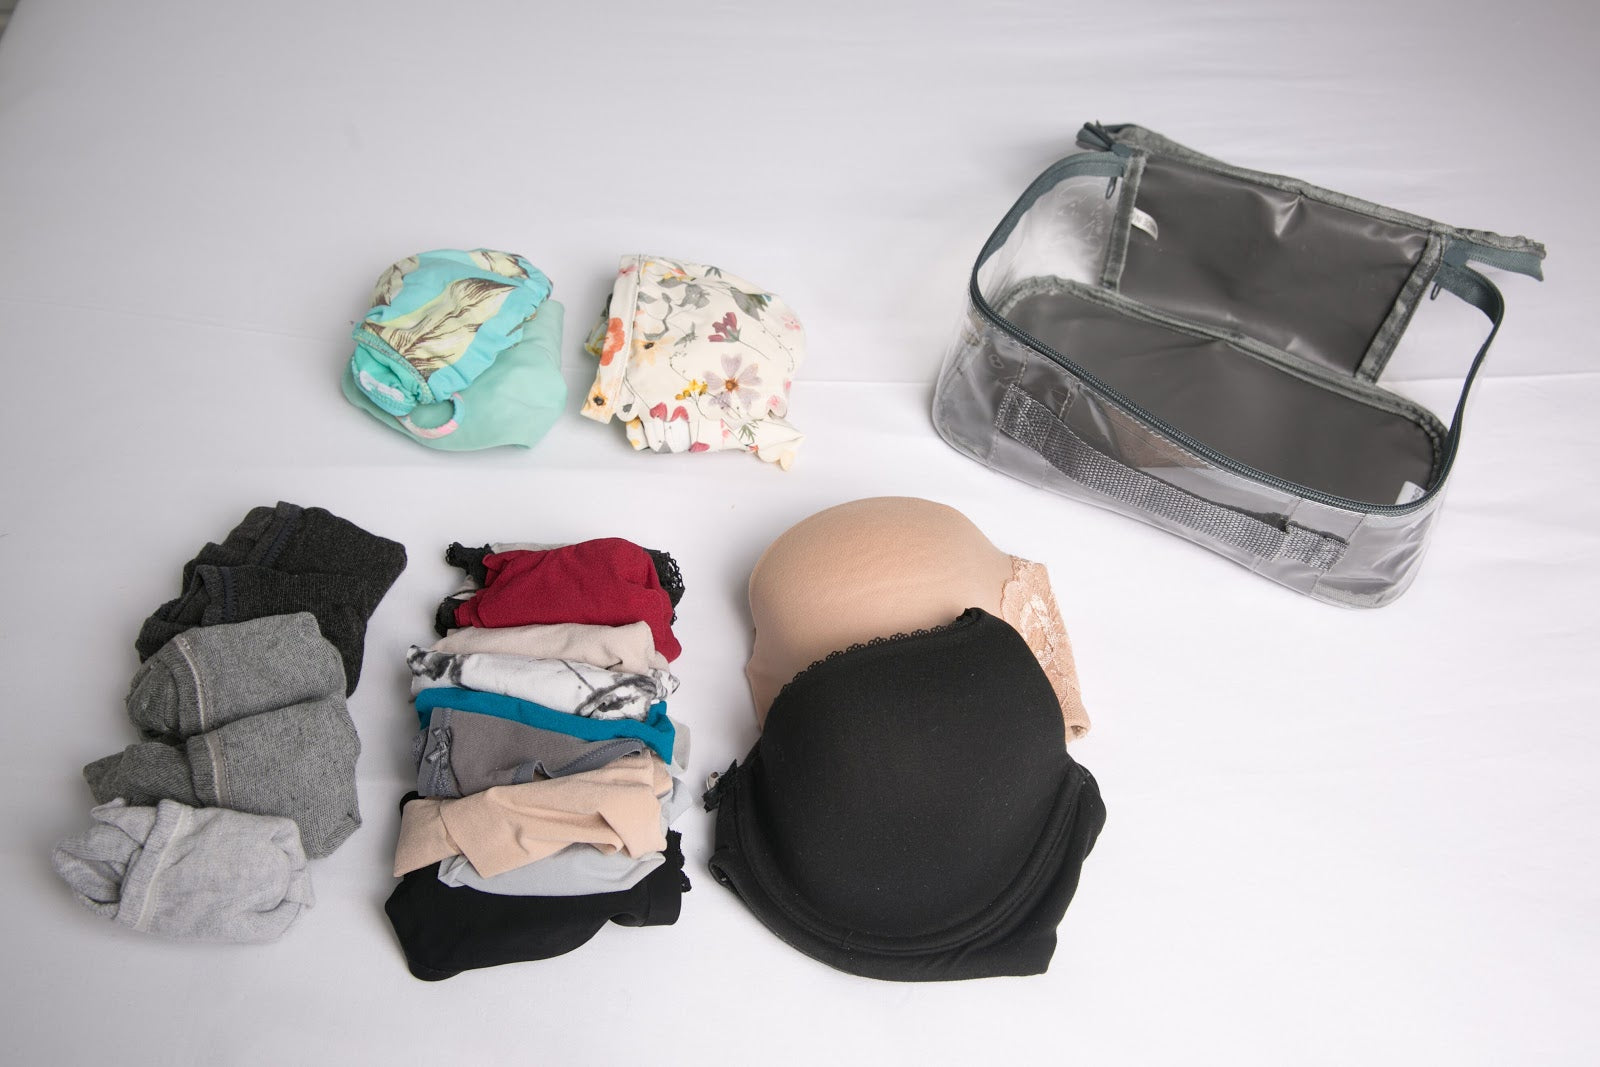 How to pack underwear for travel